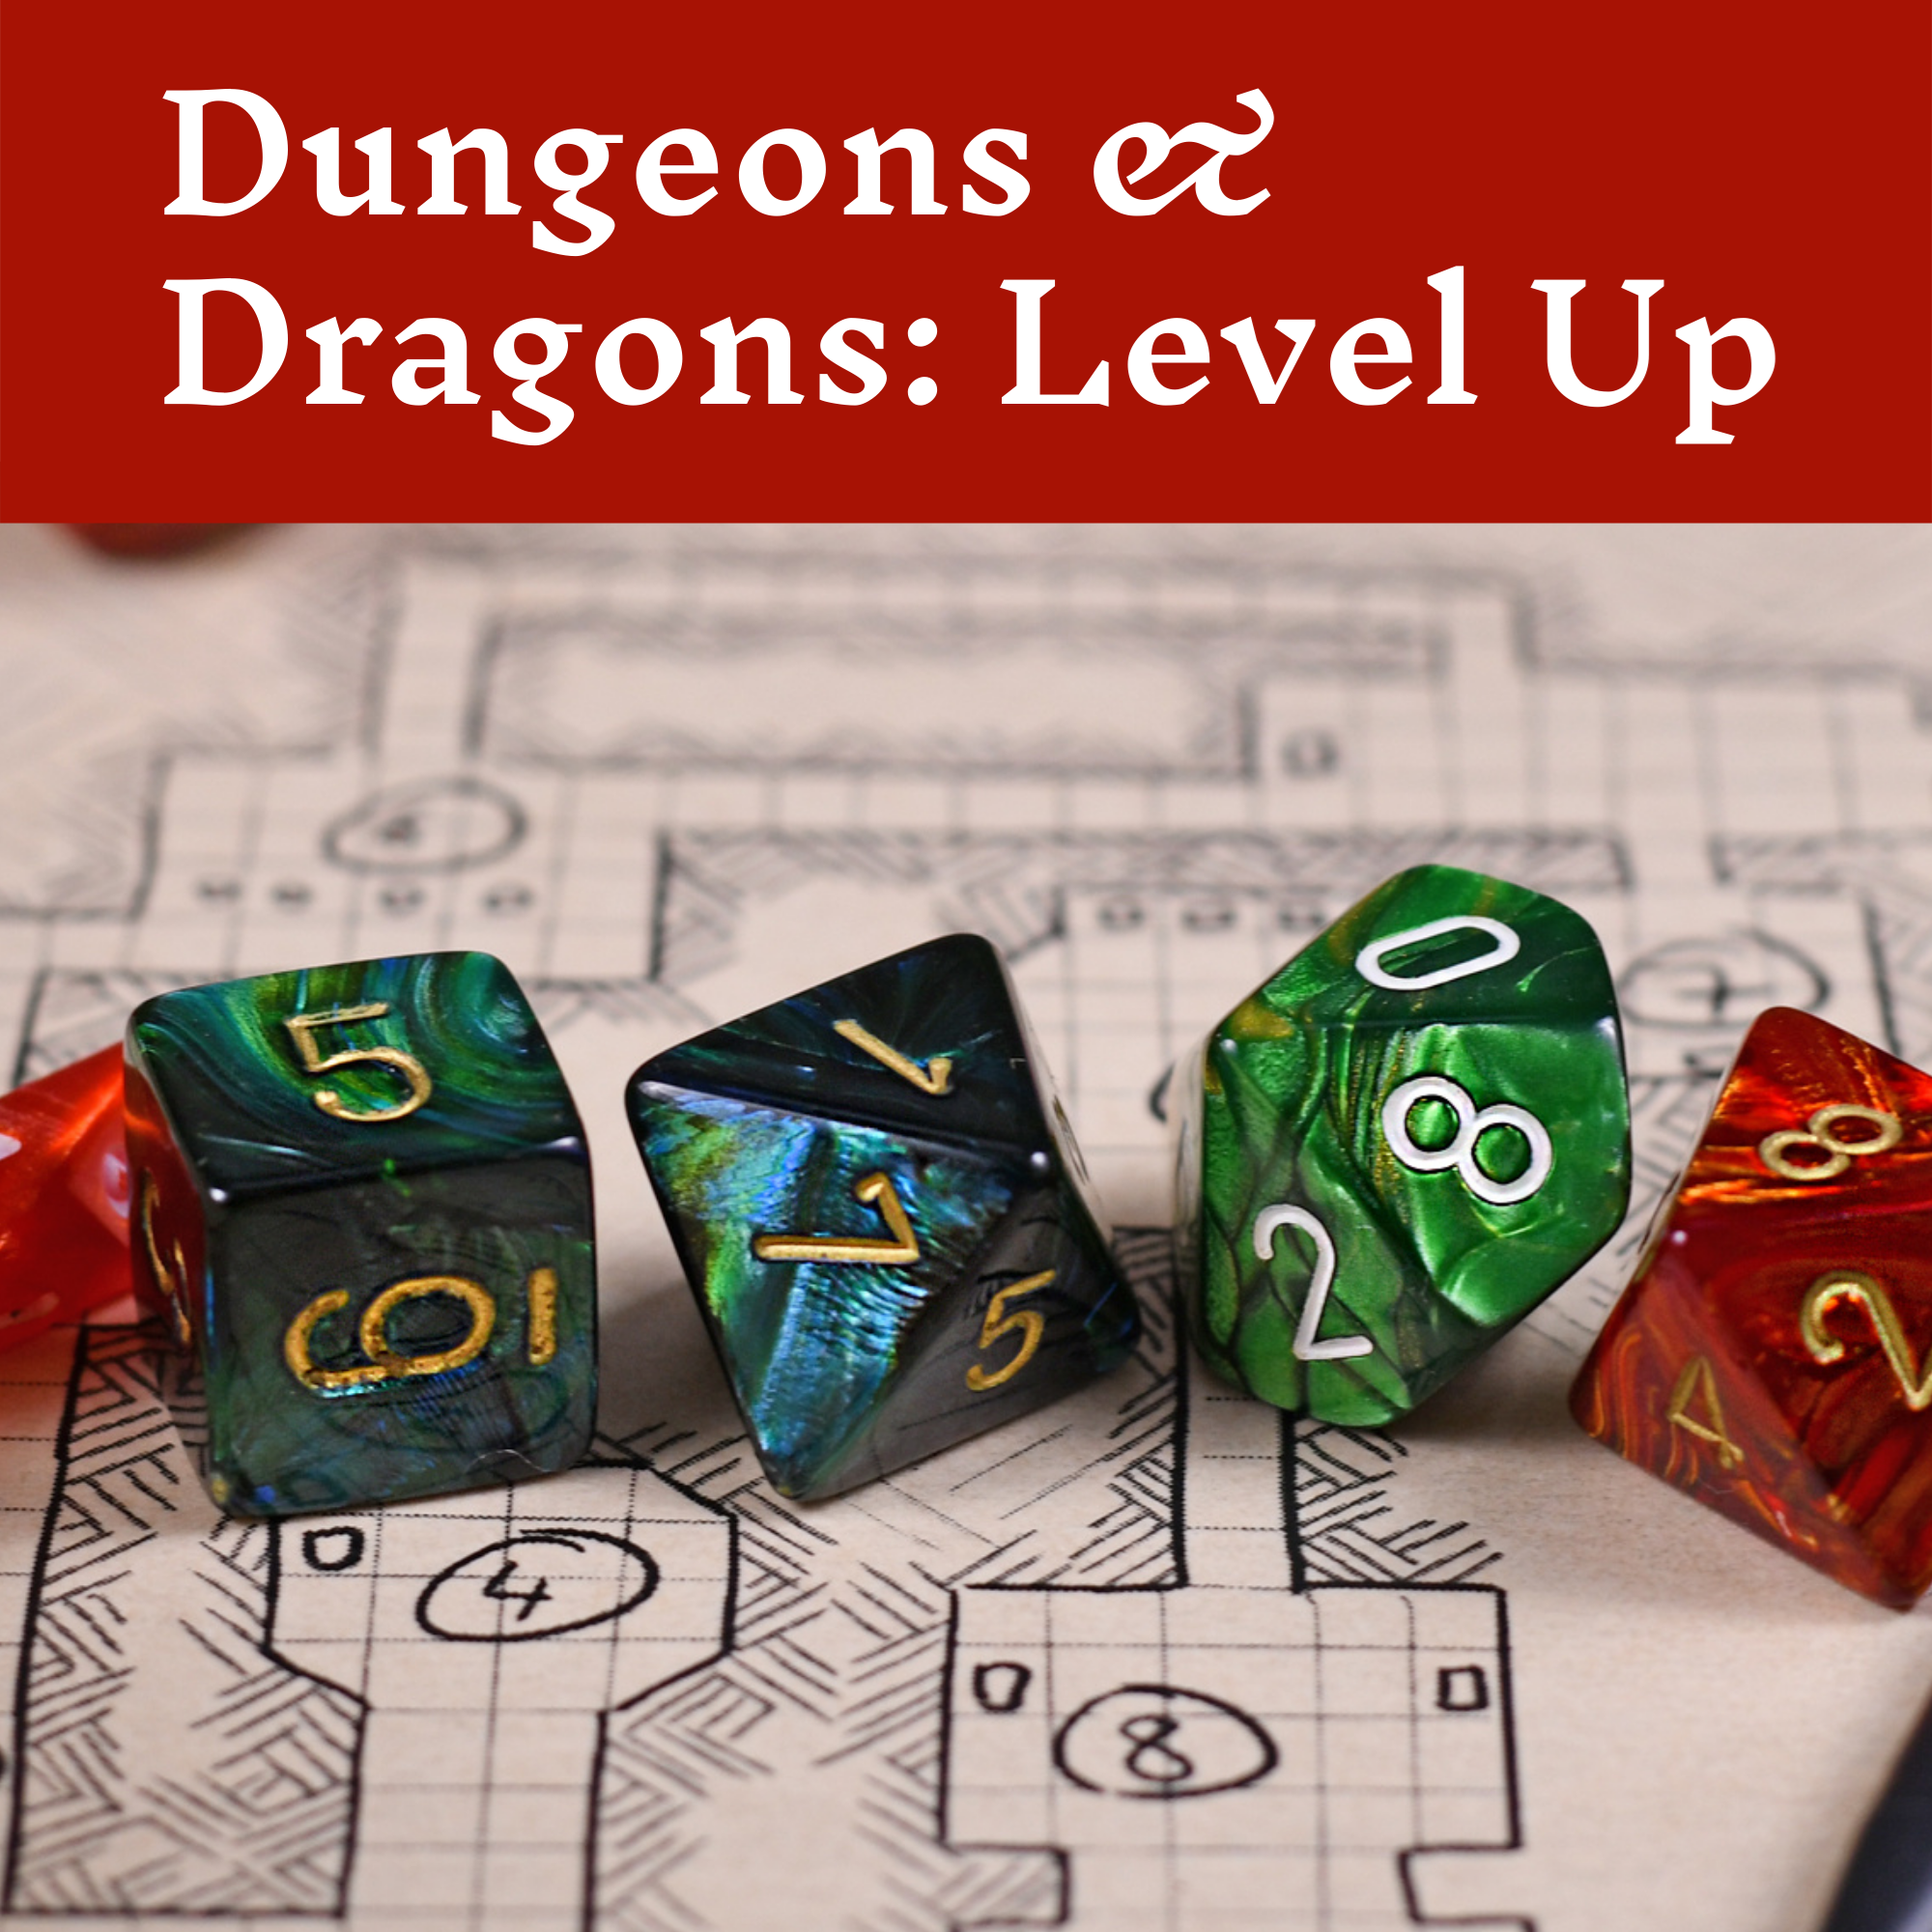 Dungeons & Dragons: Level Up